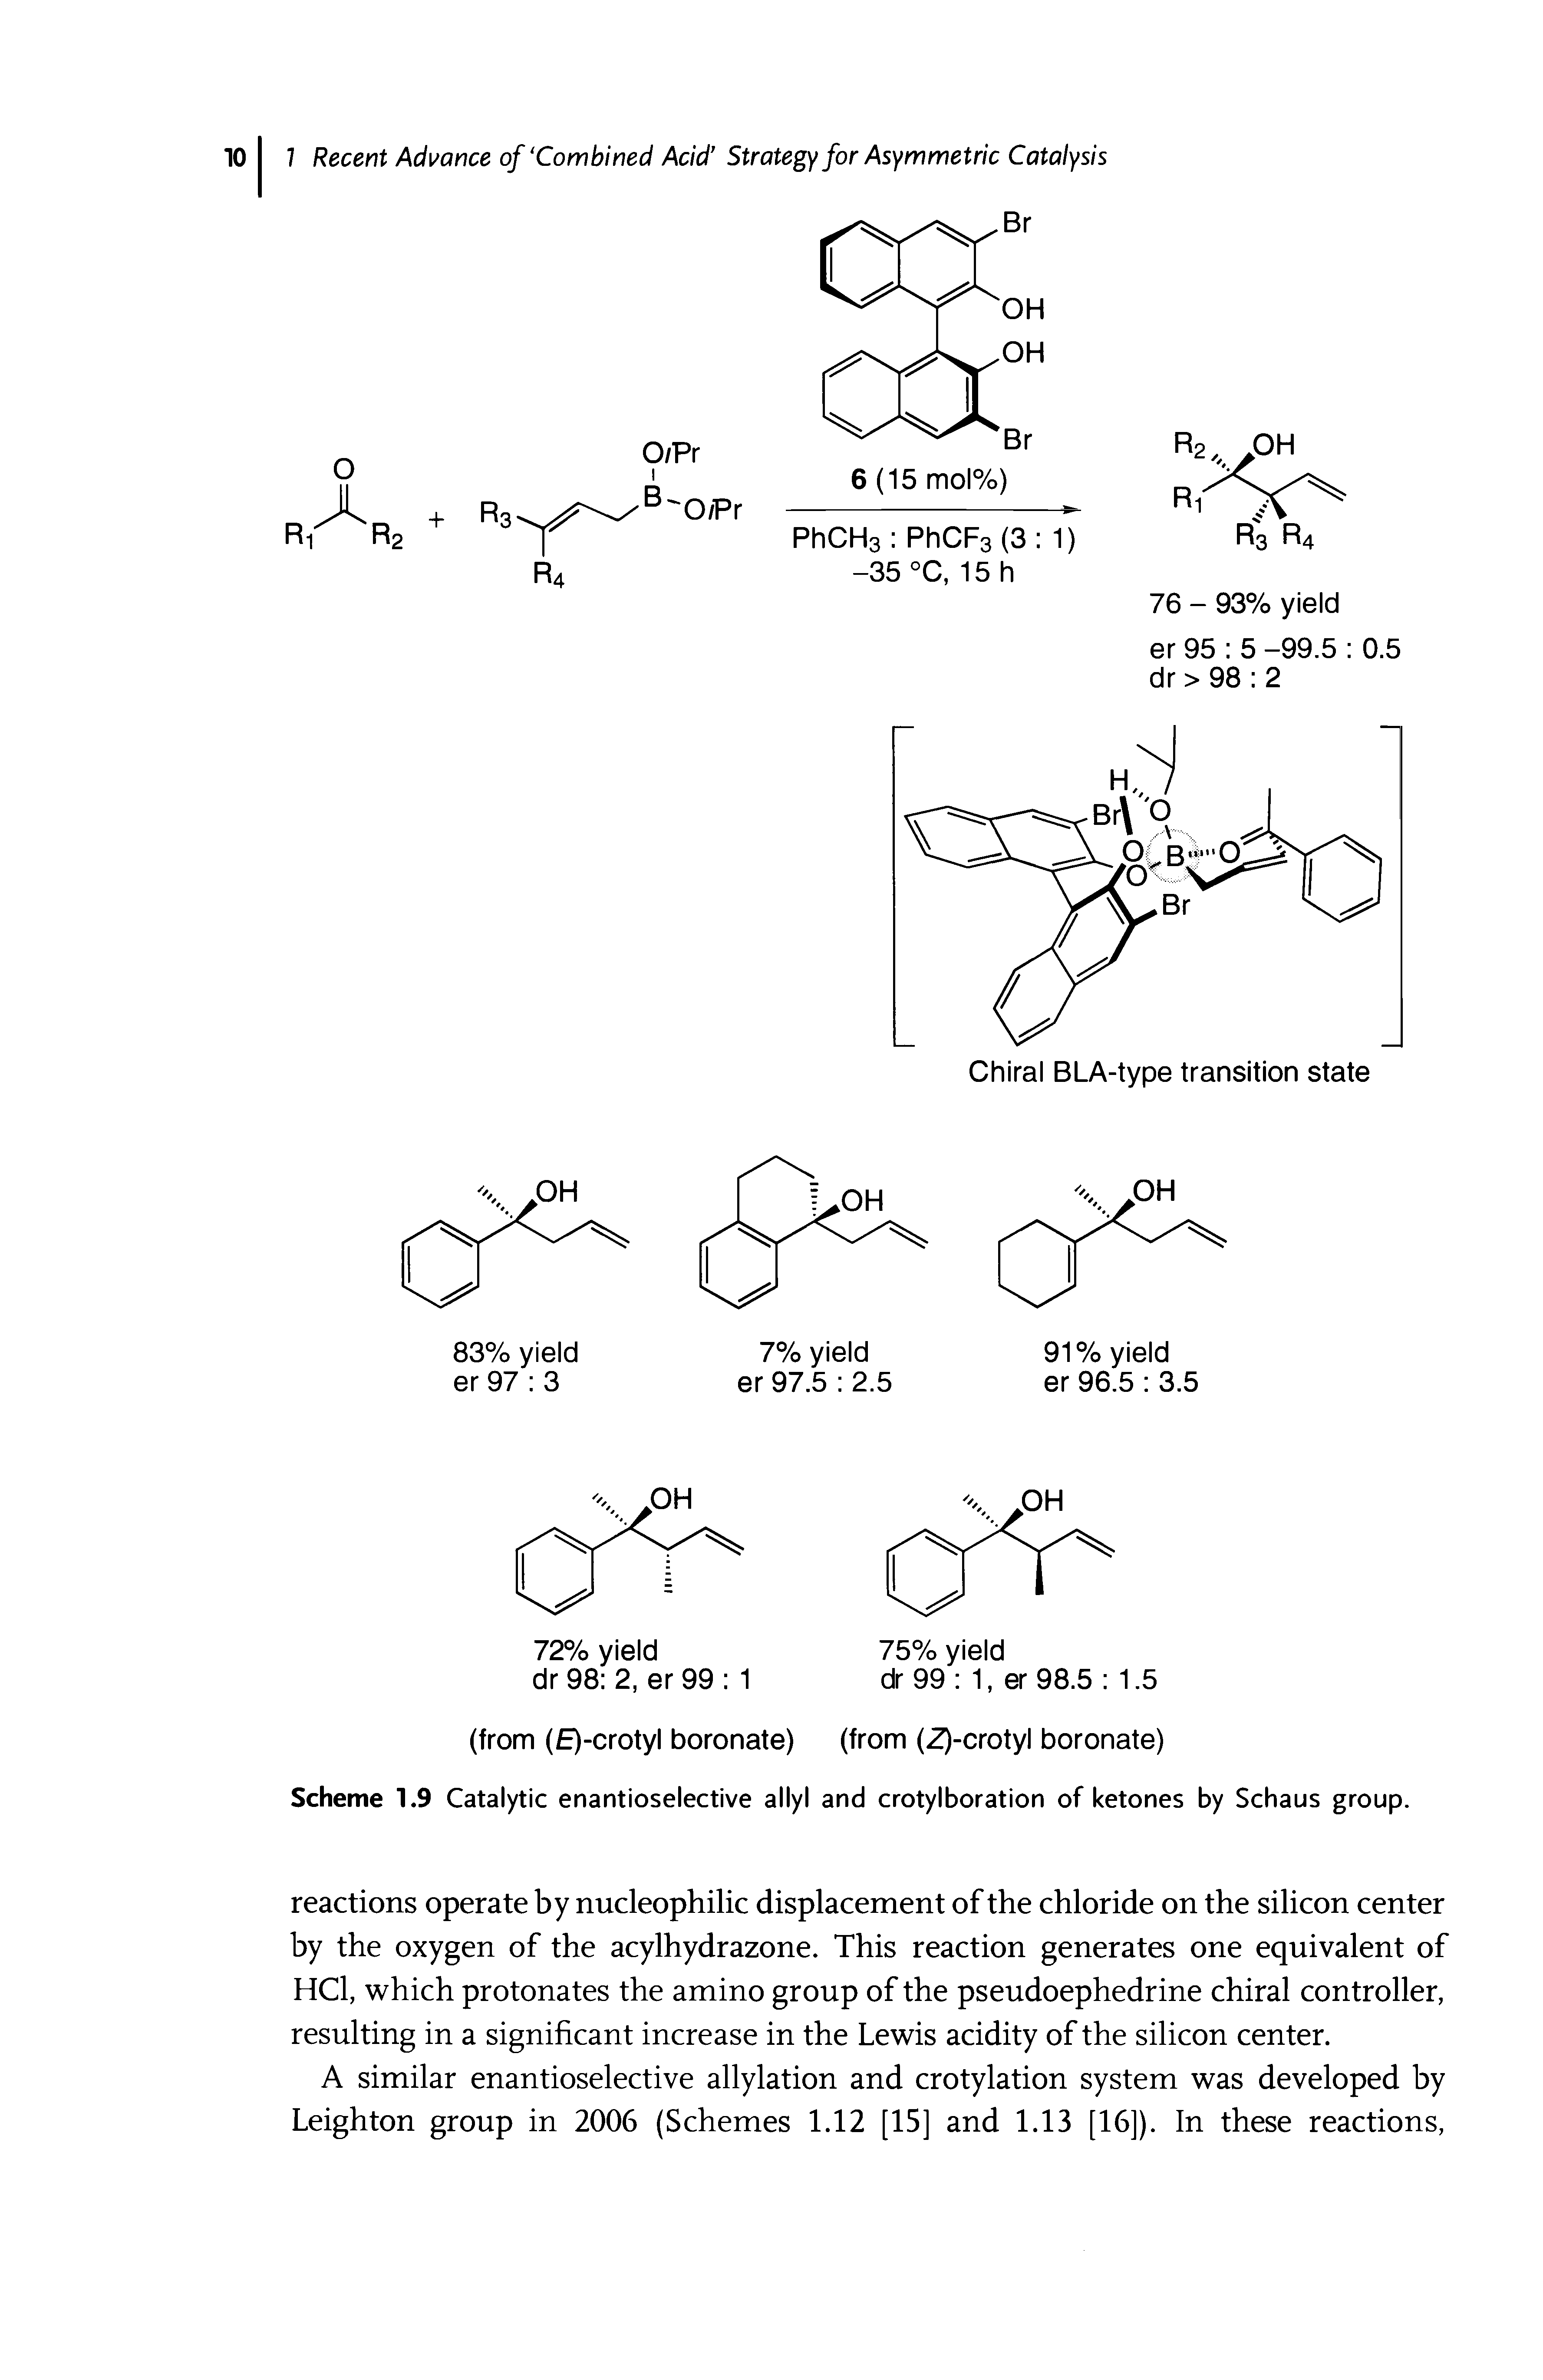 Scheme 1.9 Catalytic enantioselective allyl and crotylboration of ketones by Schaus group.